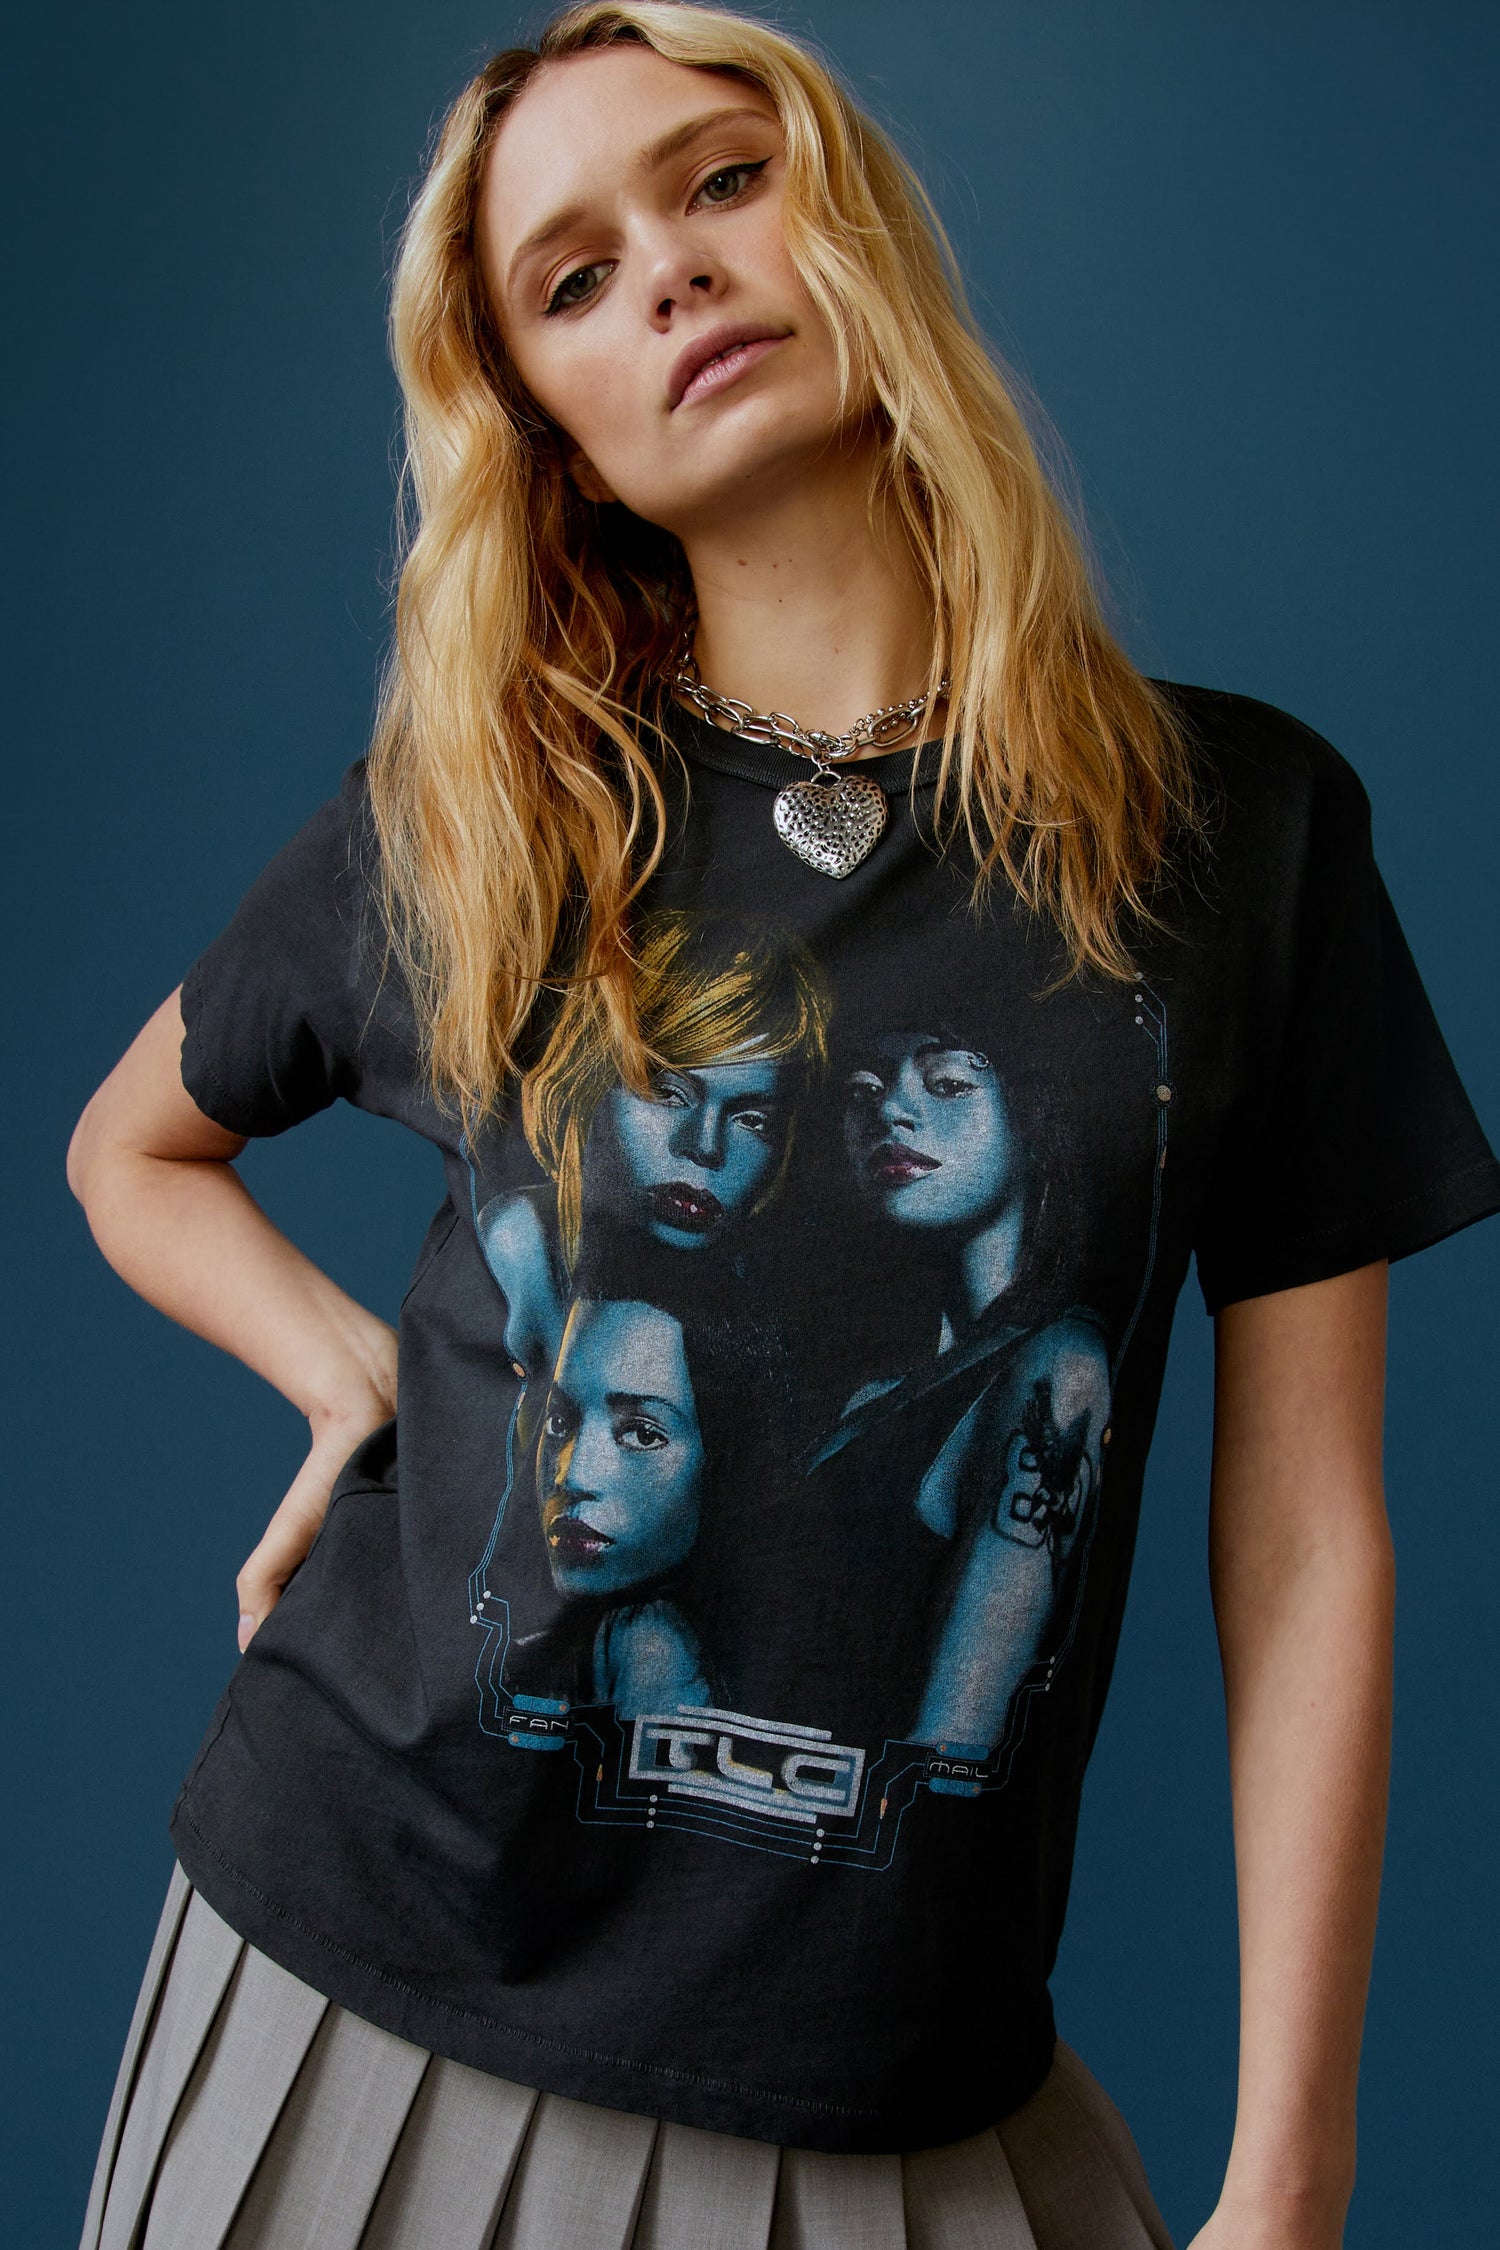 A blonde-haired model featuring a black tee designed with a portrait of each member of the group and stamped with 'TLC' at the back.